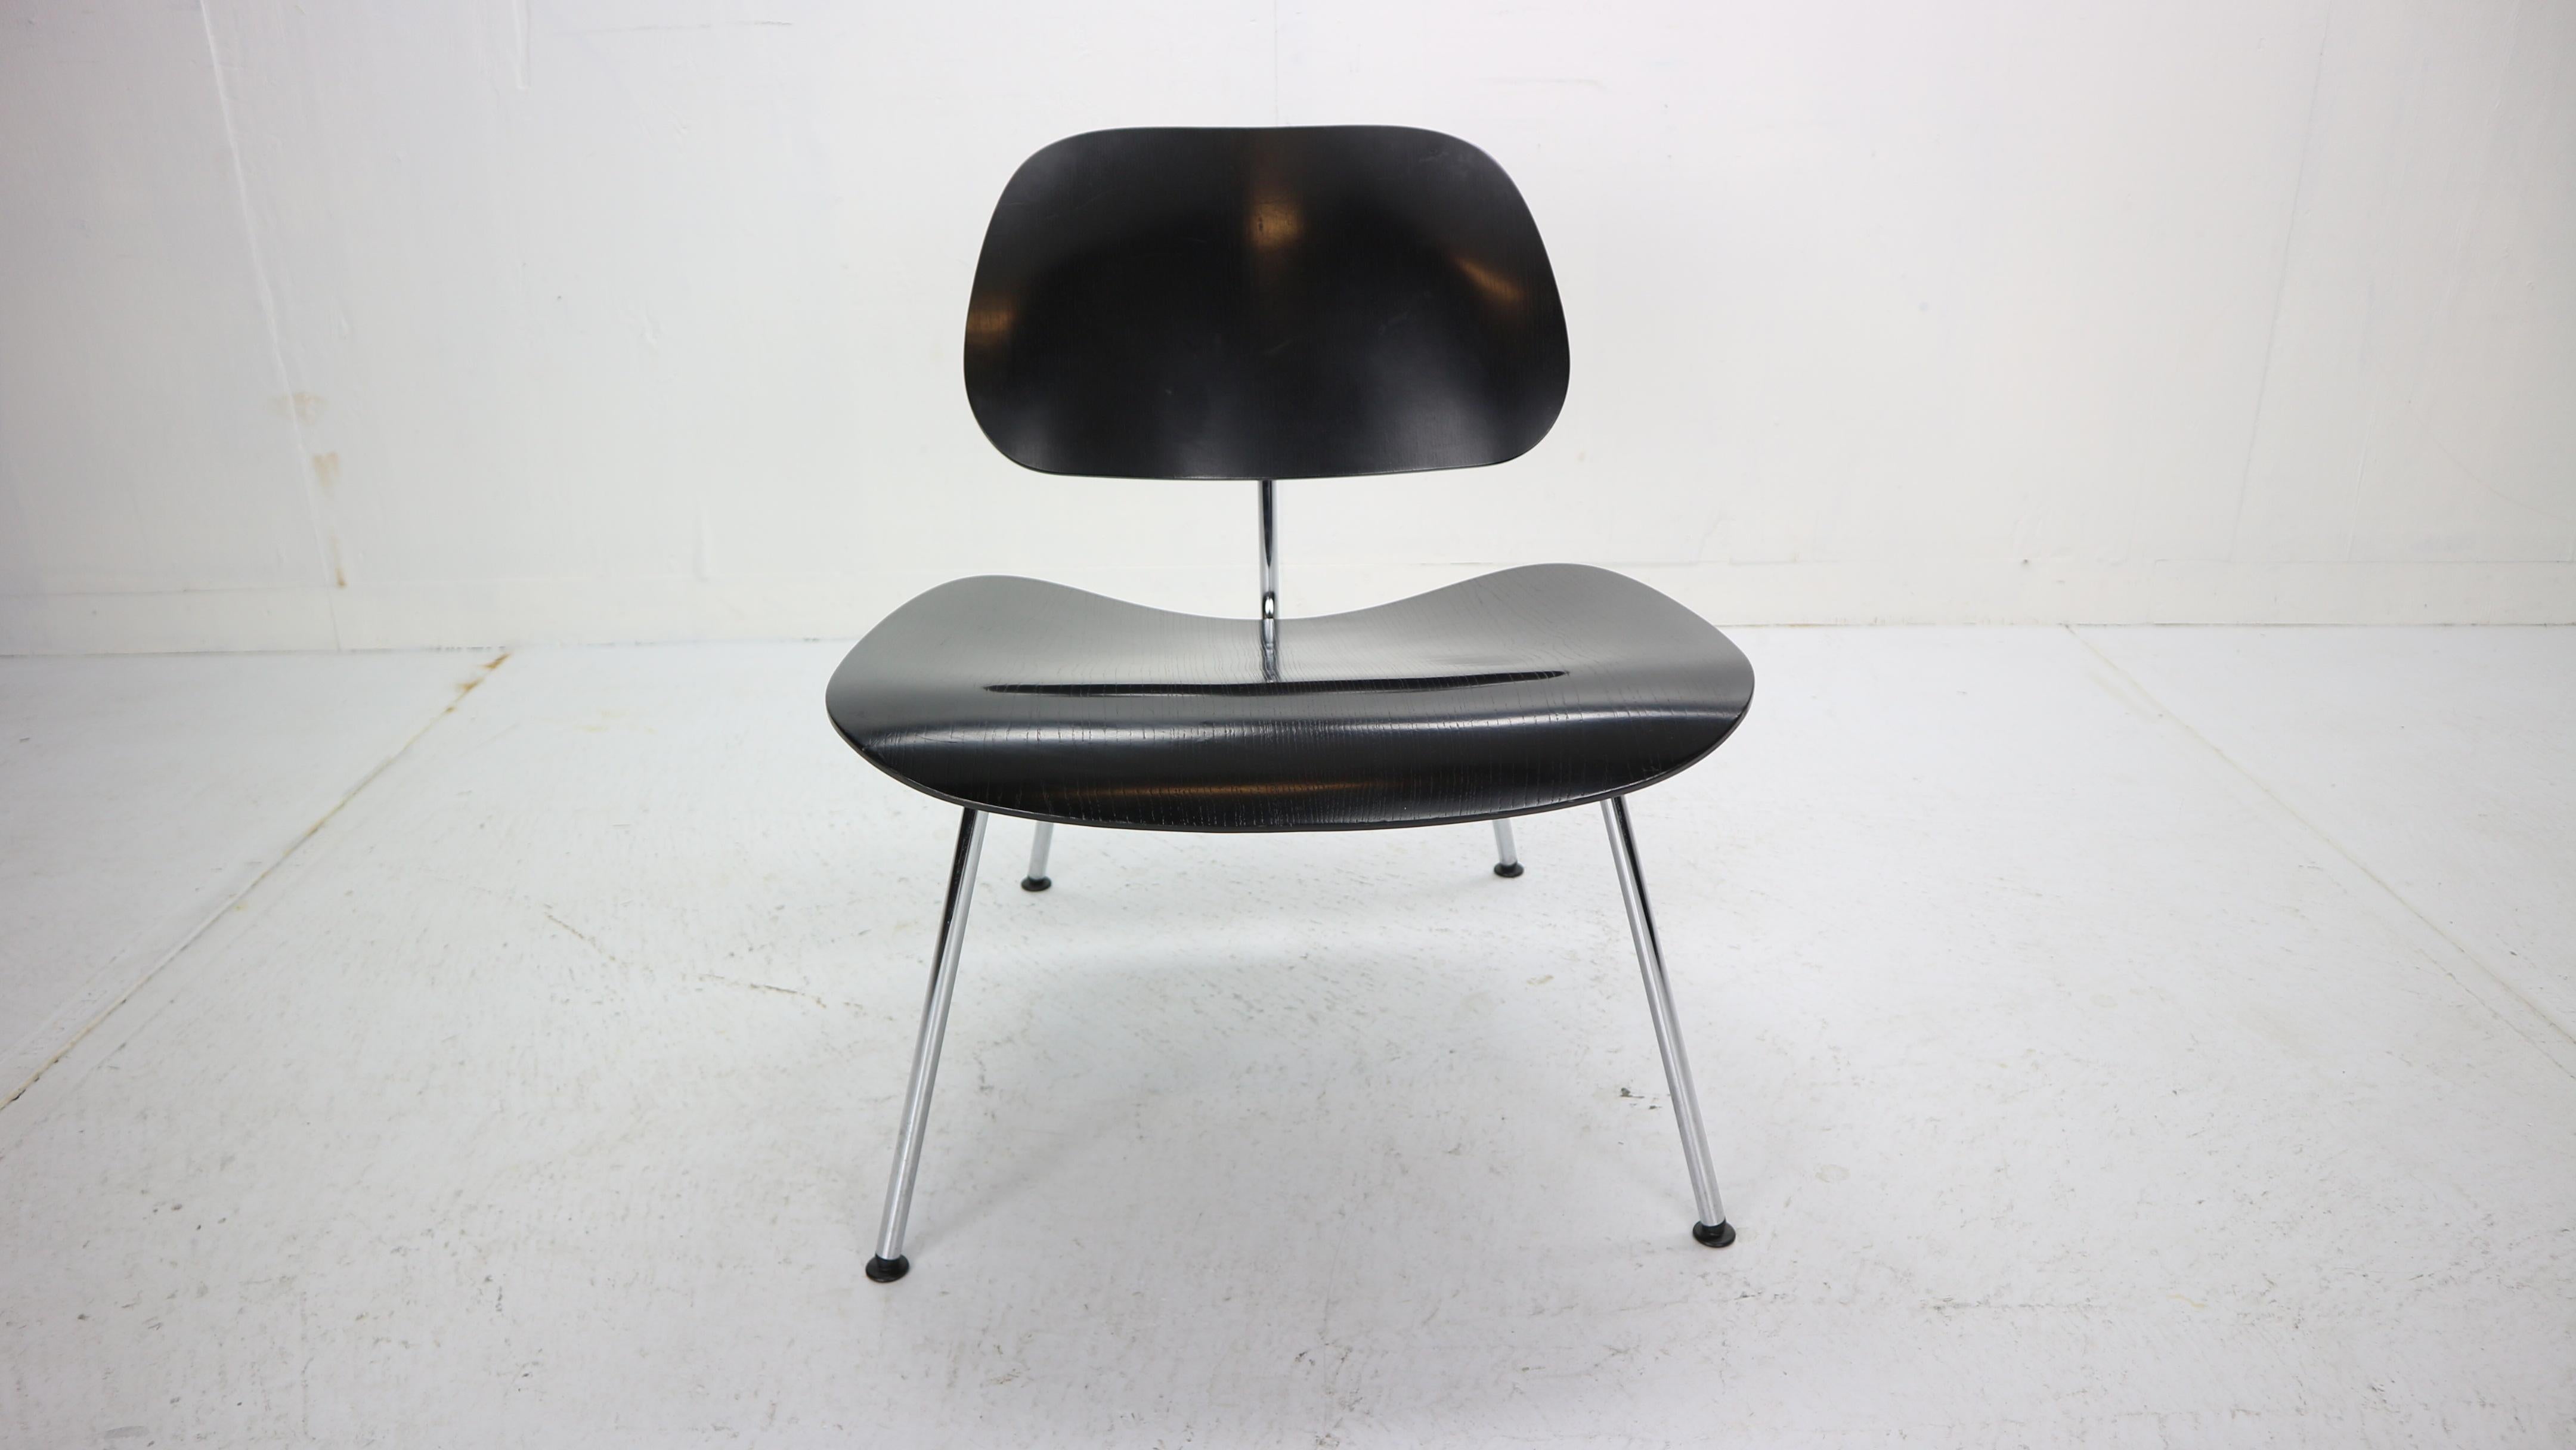 Lounge chair designed by Charles and Ray Eames for Vitra, 1999.

The Vitra LCM Chair, designed by Charles and Ray Eames, is the result of years of experimentation in which the designers were looking for new processes to adapt three-dimensionally